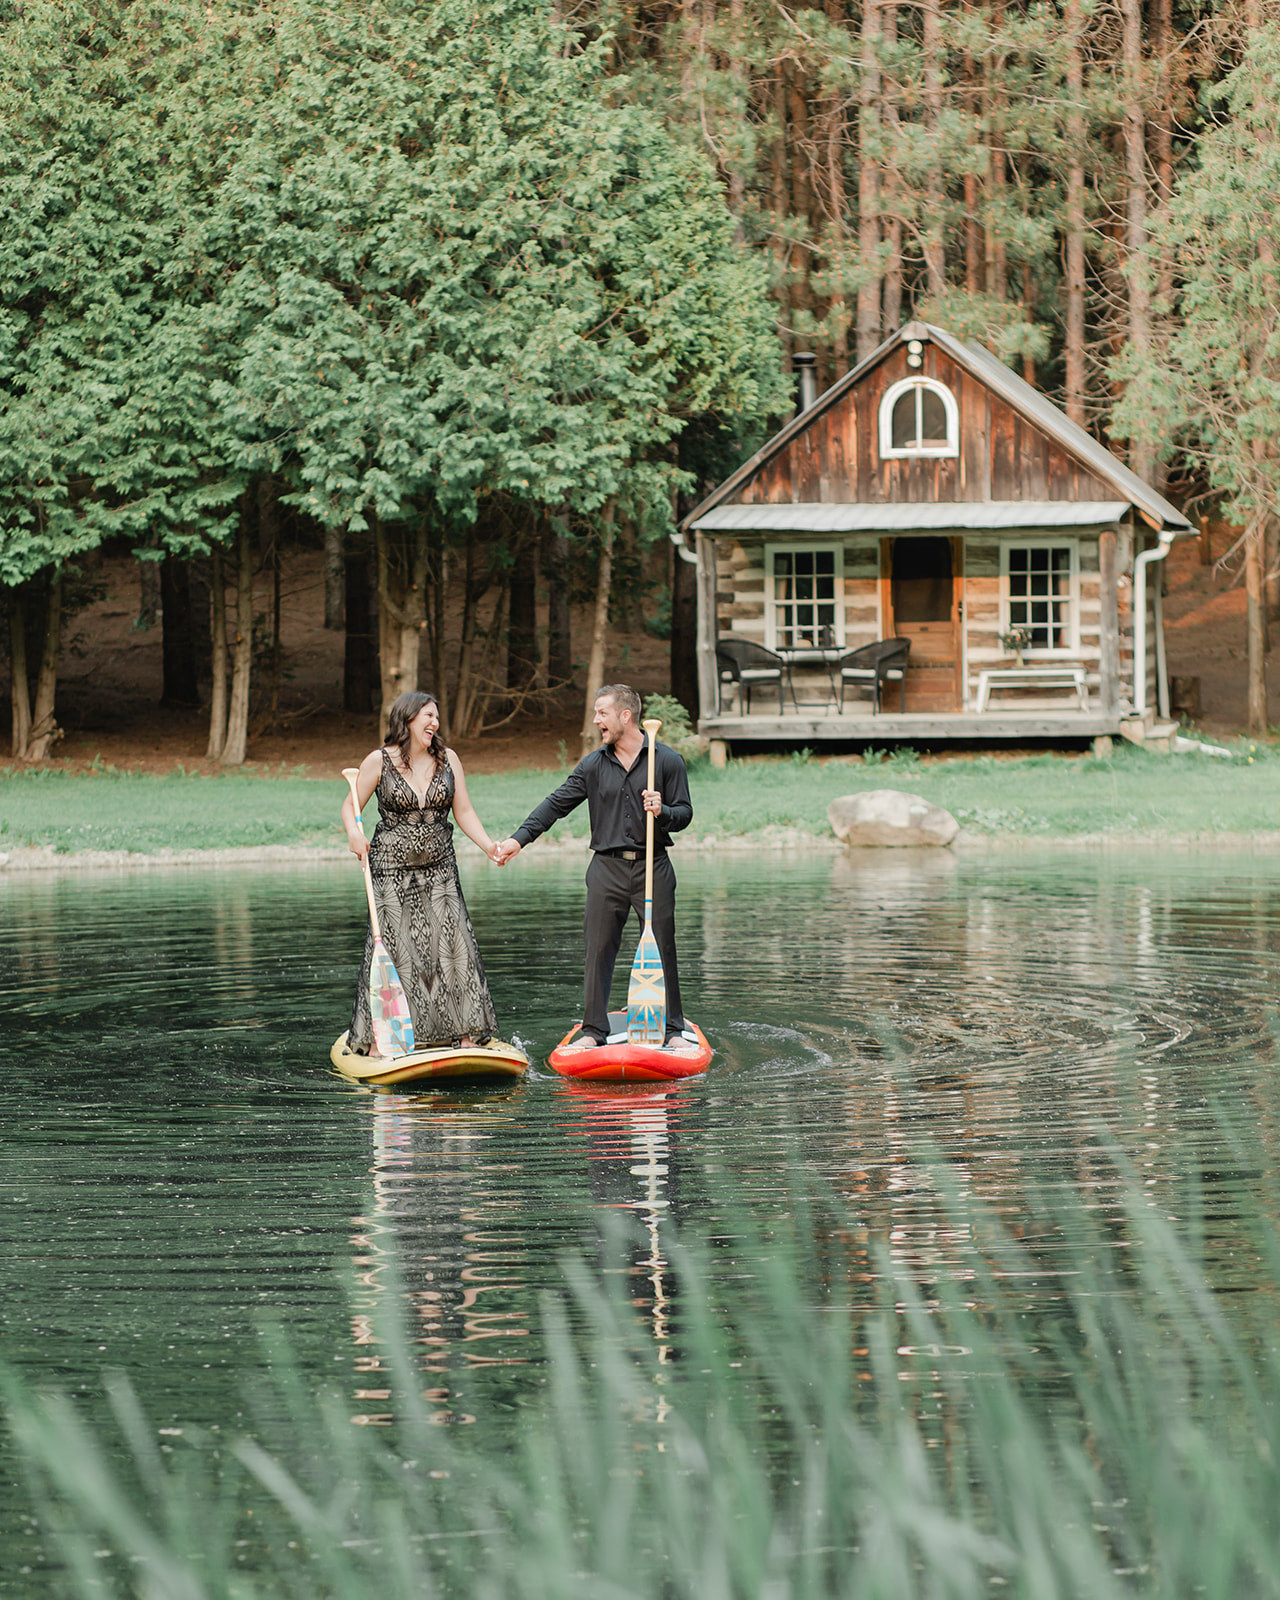 A wedding near Toronto Ontario at a cute cabin in the woods. Paddle boarding adventures! 